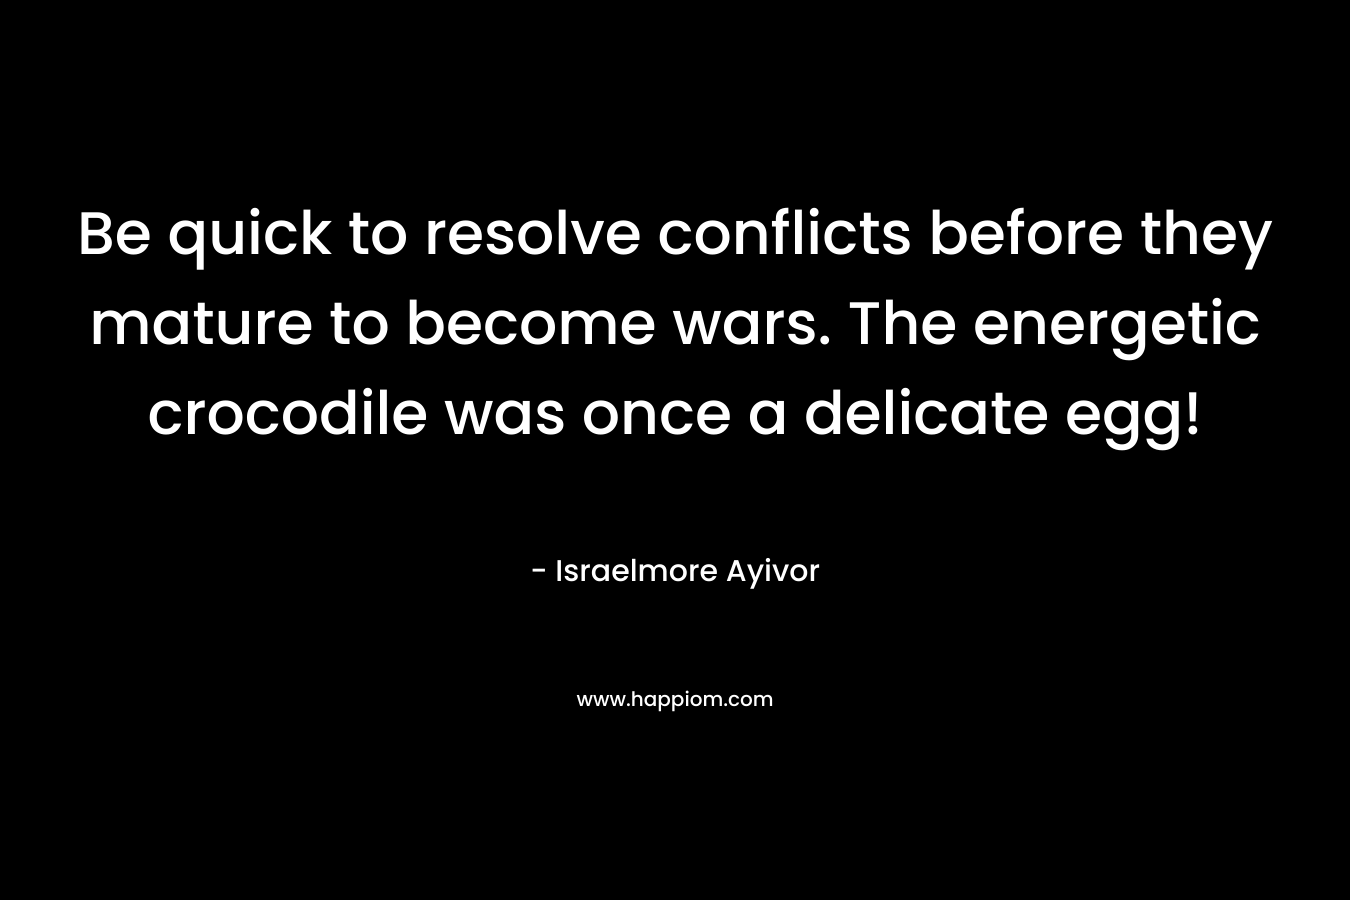 Be quick to resolve conflicts before they mature to become wars. The energetic crocodile was once a delicate egg! – Israelmore Ayivor